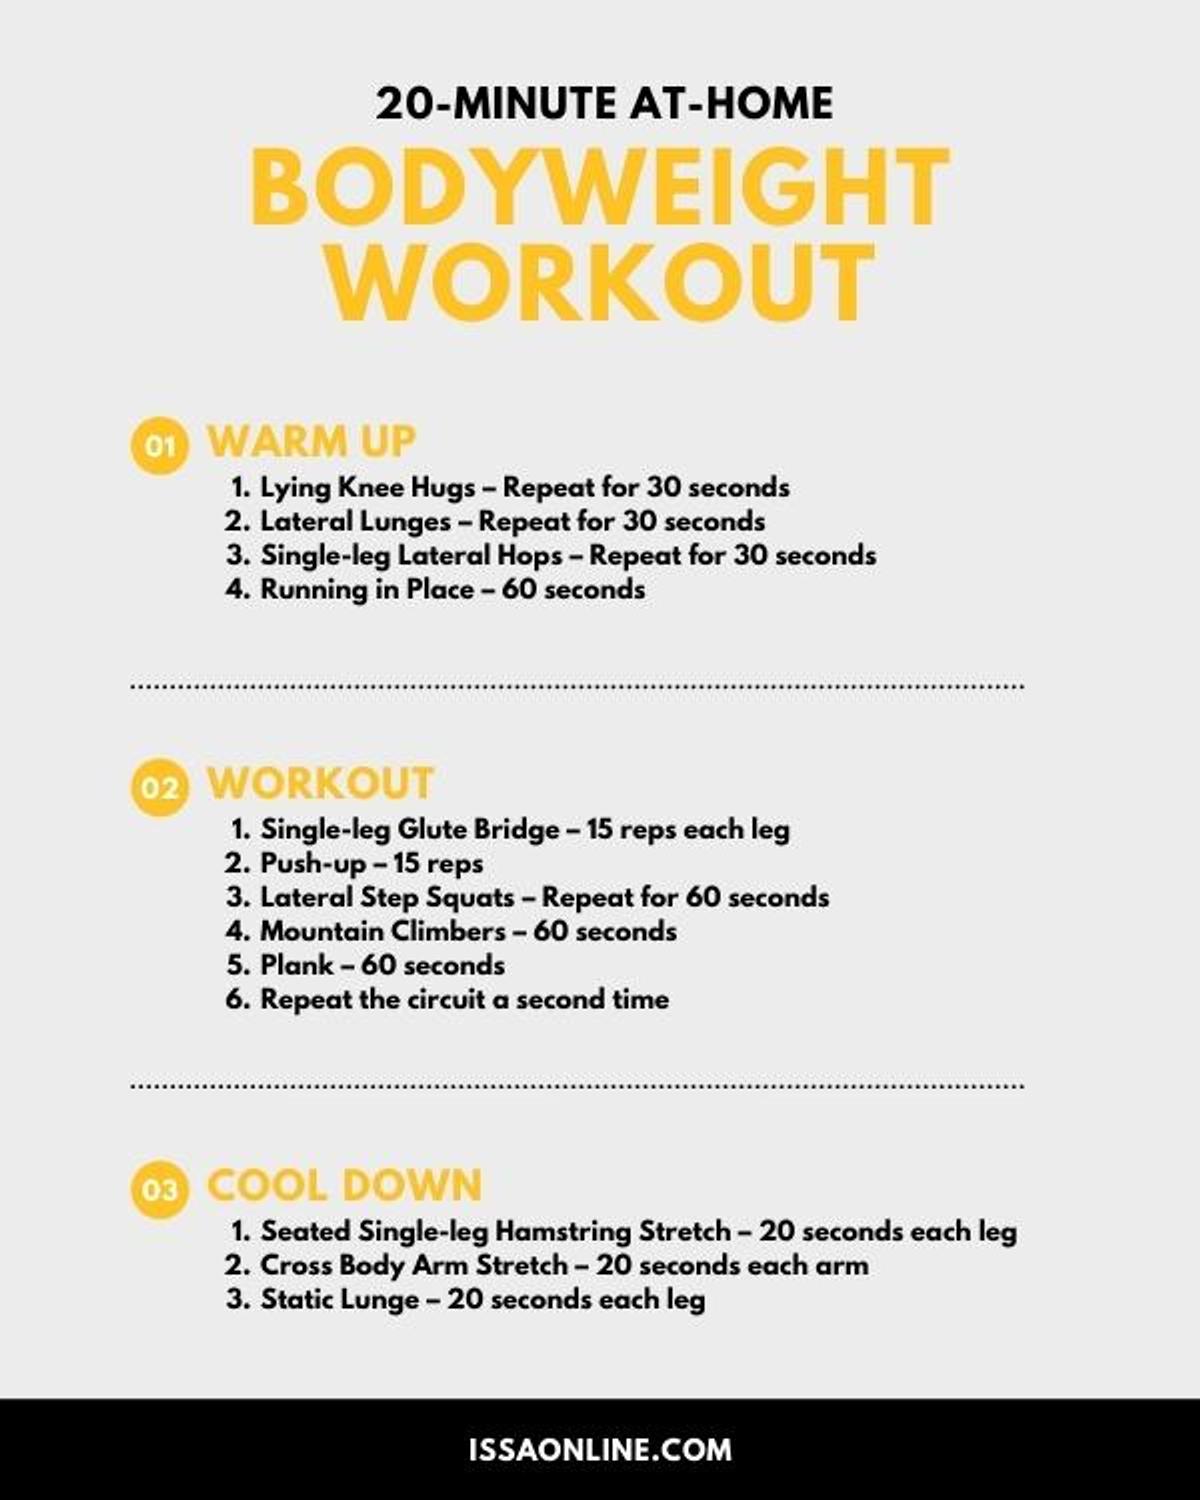 ISSA, International Sports Sciences Association, Certified Personal Trainer, ISSAonline, 20-Minute At-Home Bodyweight Workout, Handout